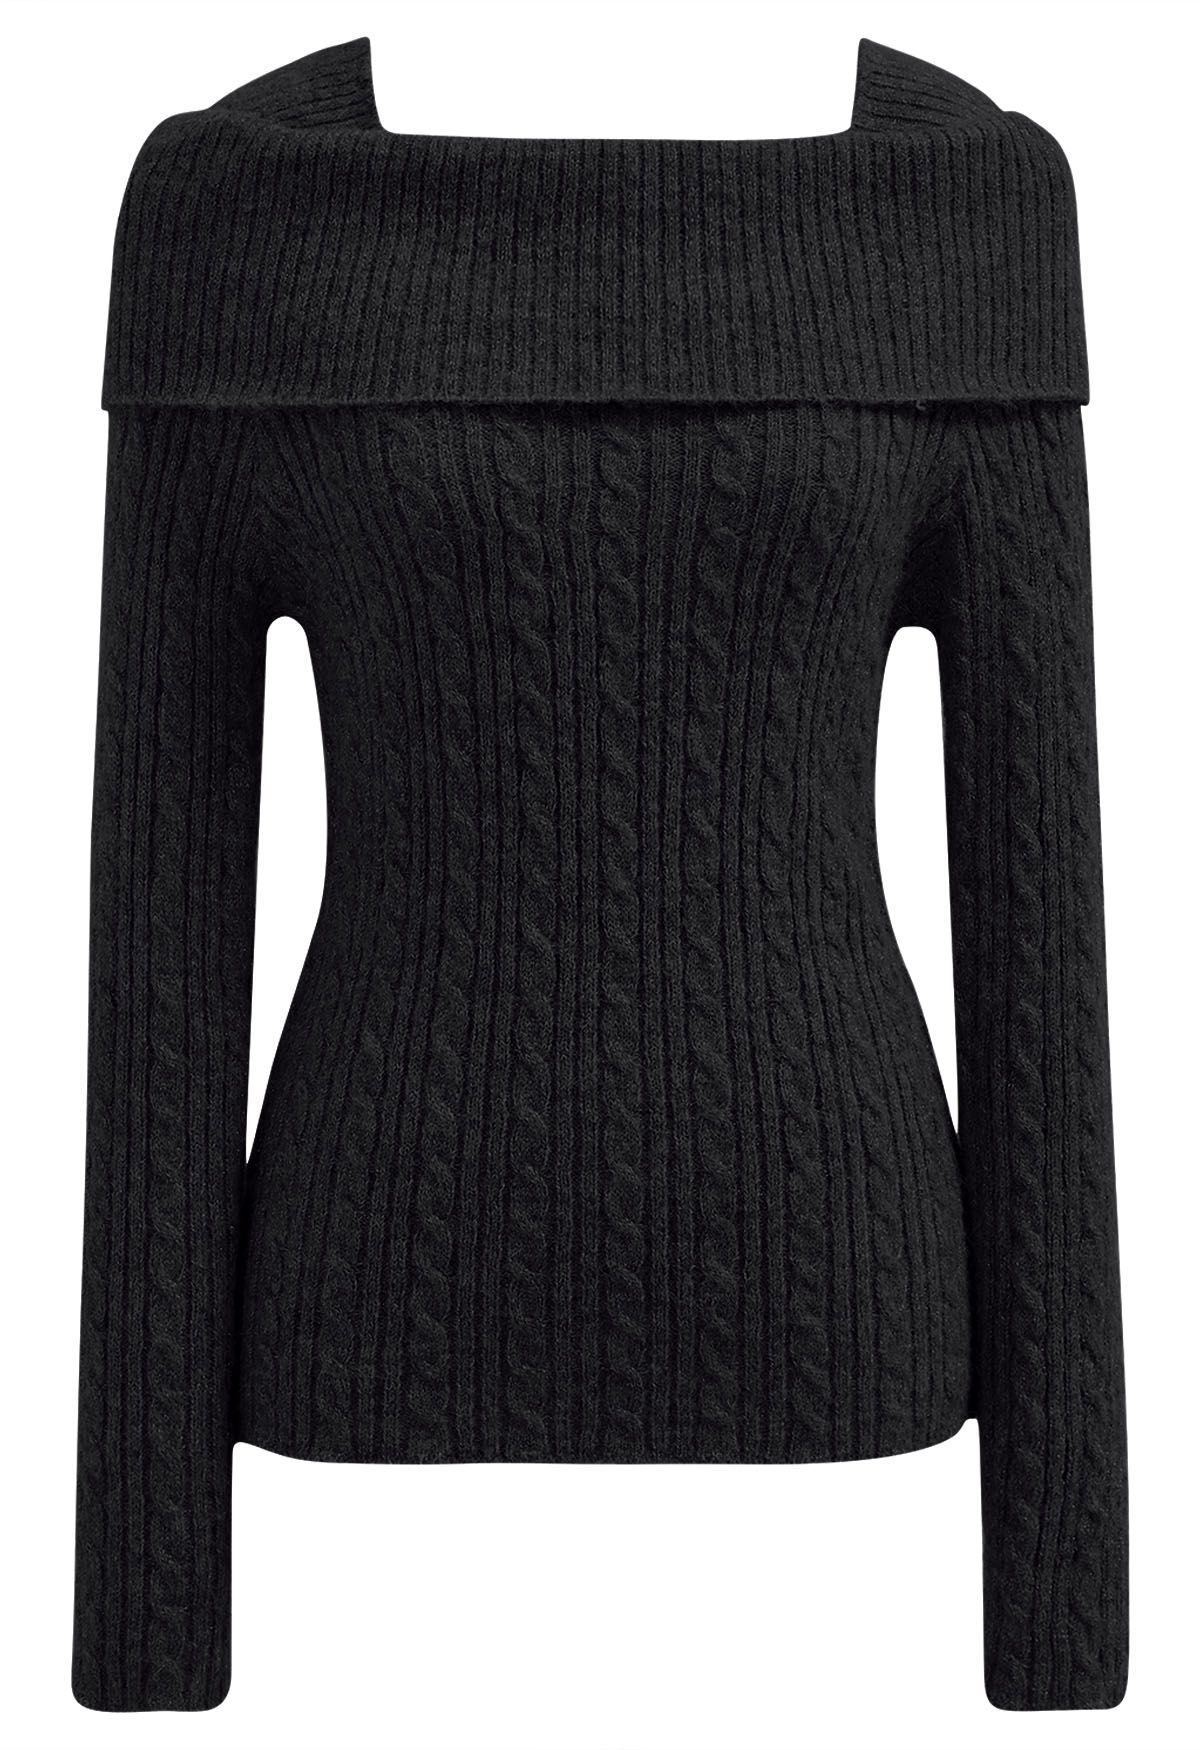 Folded Shoulder Cable Knit Top in Black - Retro, Indie and Unique Fashion